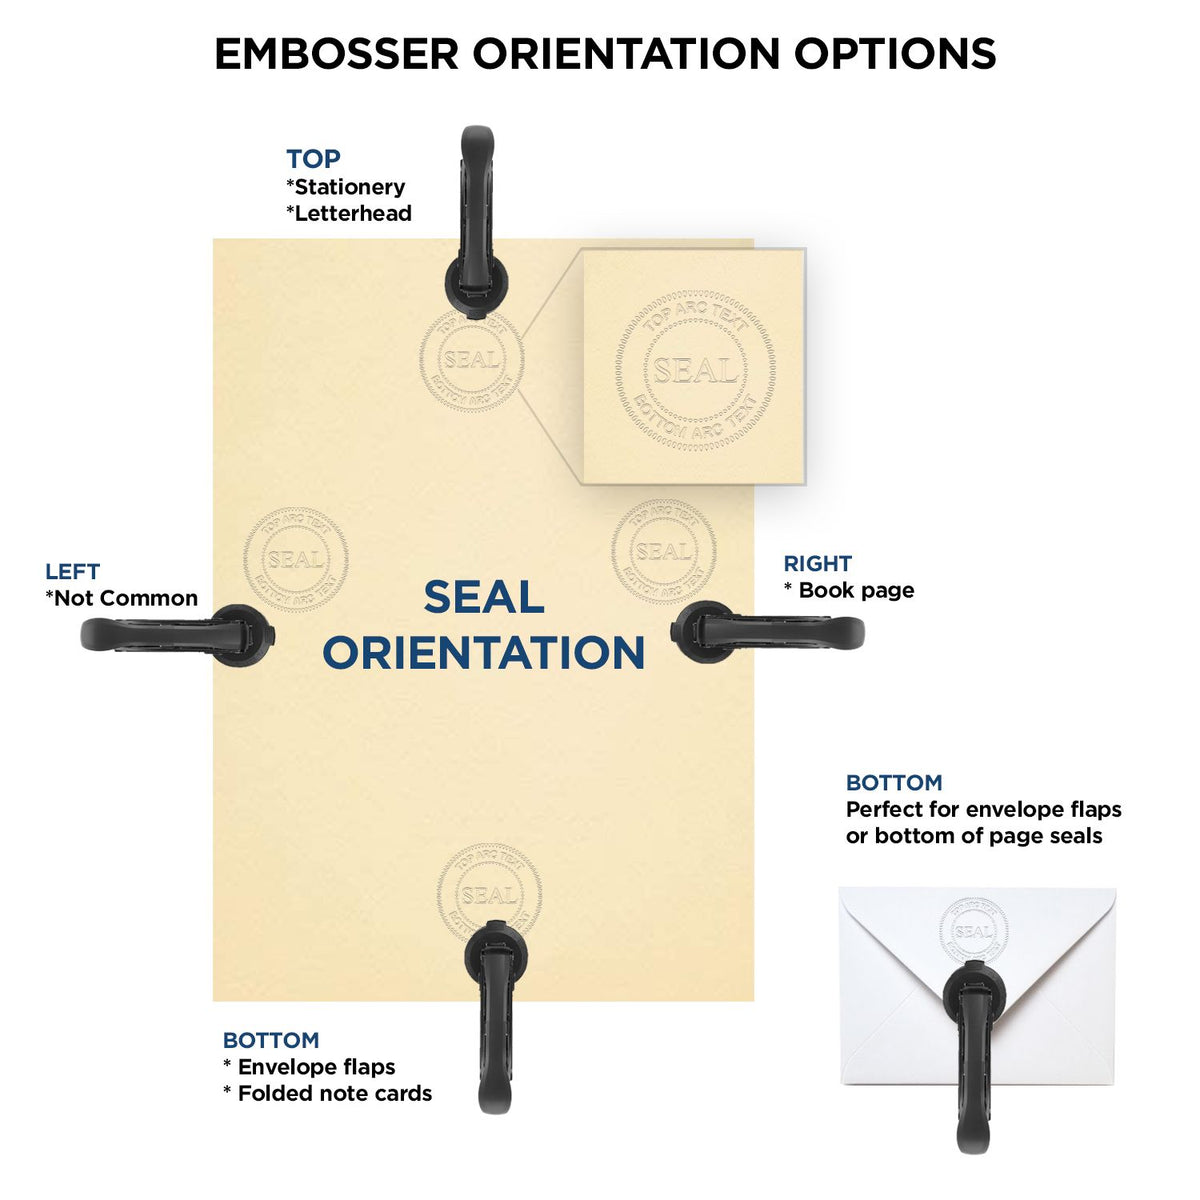 An infographic for the Heavy Duty Cast Iron Utah Architect Embosser showing embosser orientation, this is showing examples of a top, bottom, right and left insert.